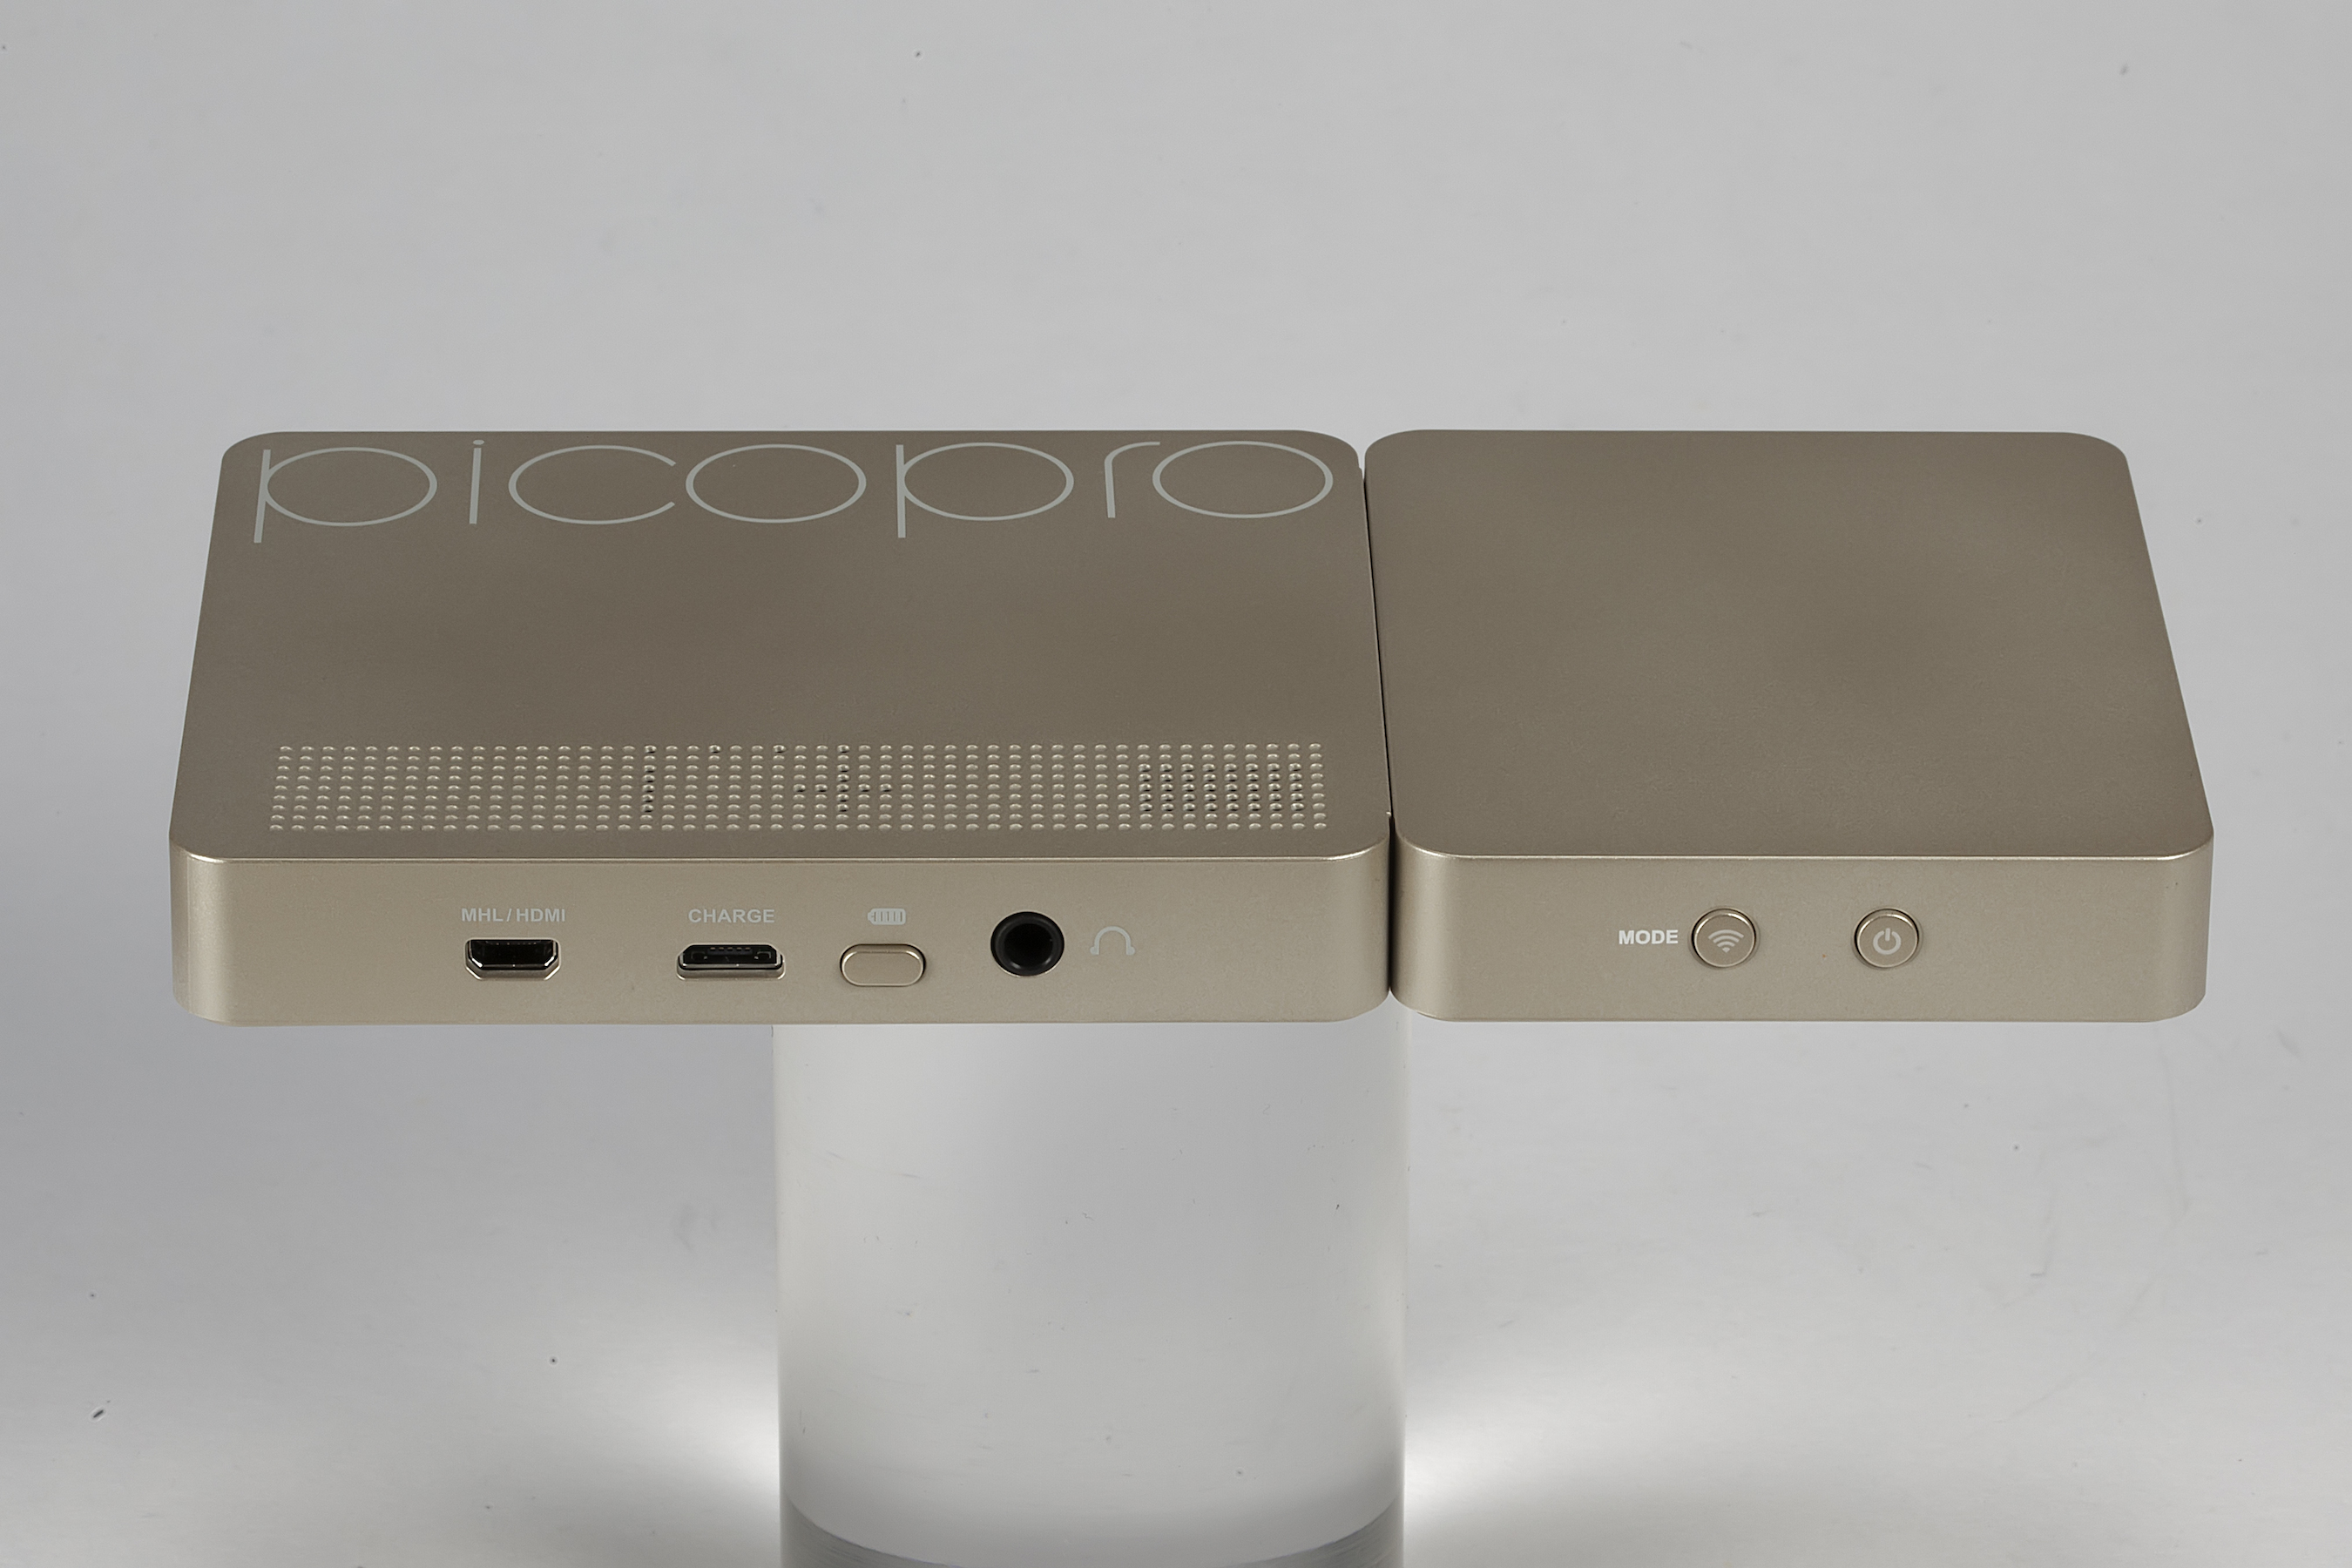 PicoPro HD Laser Pico Projector by Celluon